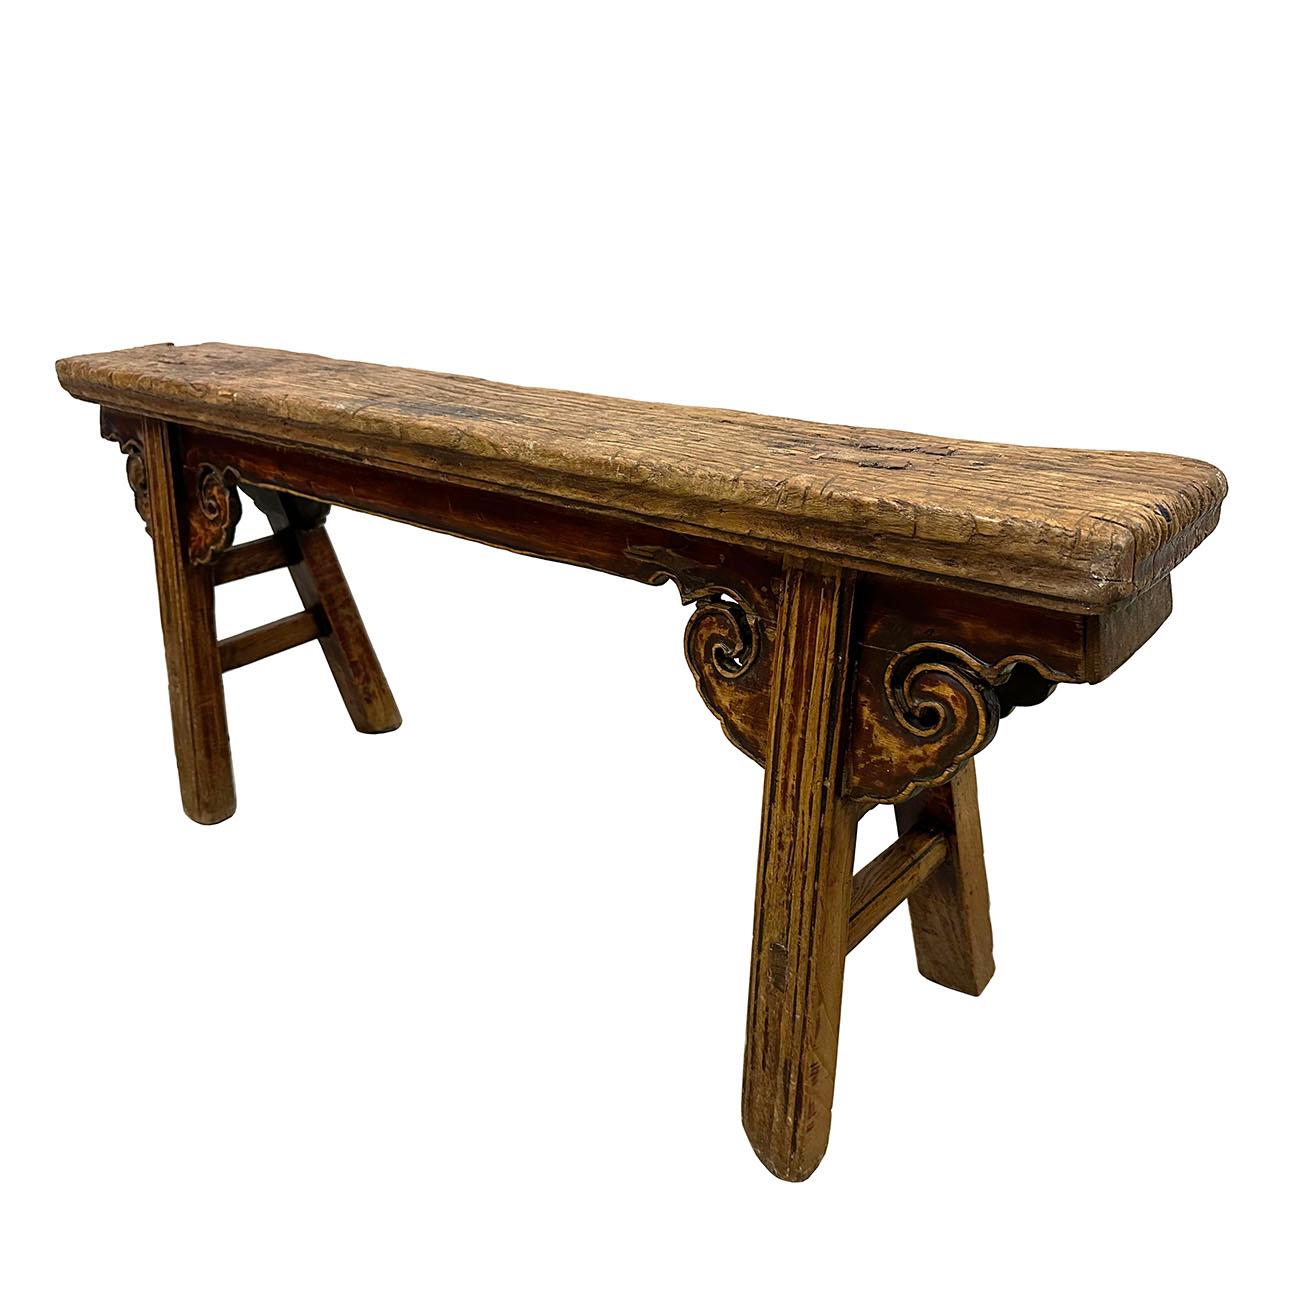 This Chinese antique country long bench that you can use it as a coffee table. This bench was a classic design and elegant with some simple carving and solid construction. Smooth to touch. A lot of patina. It was used everywhere in ancient China,